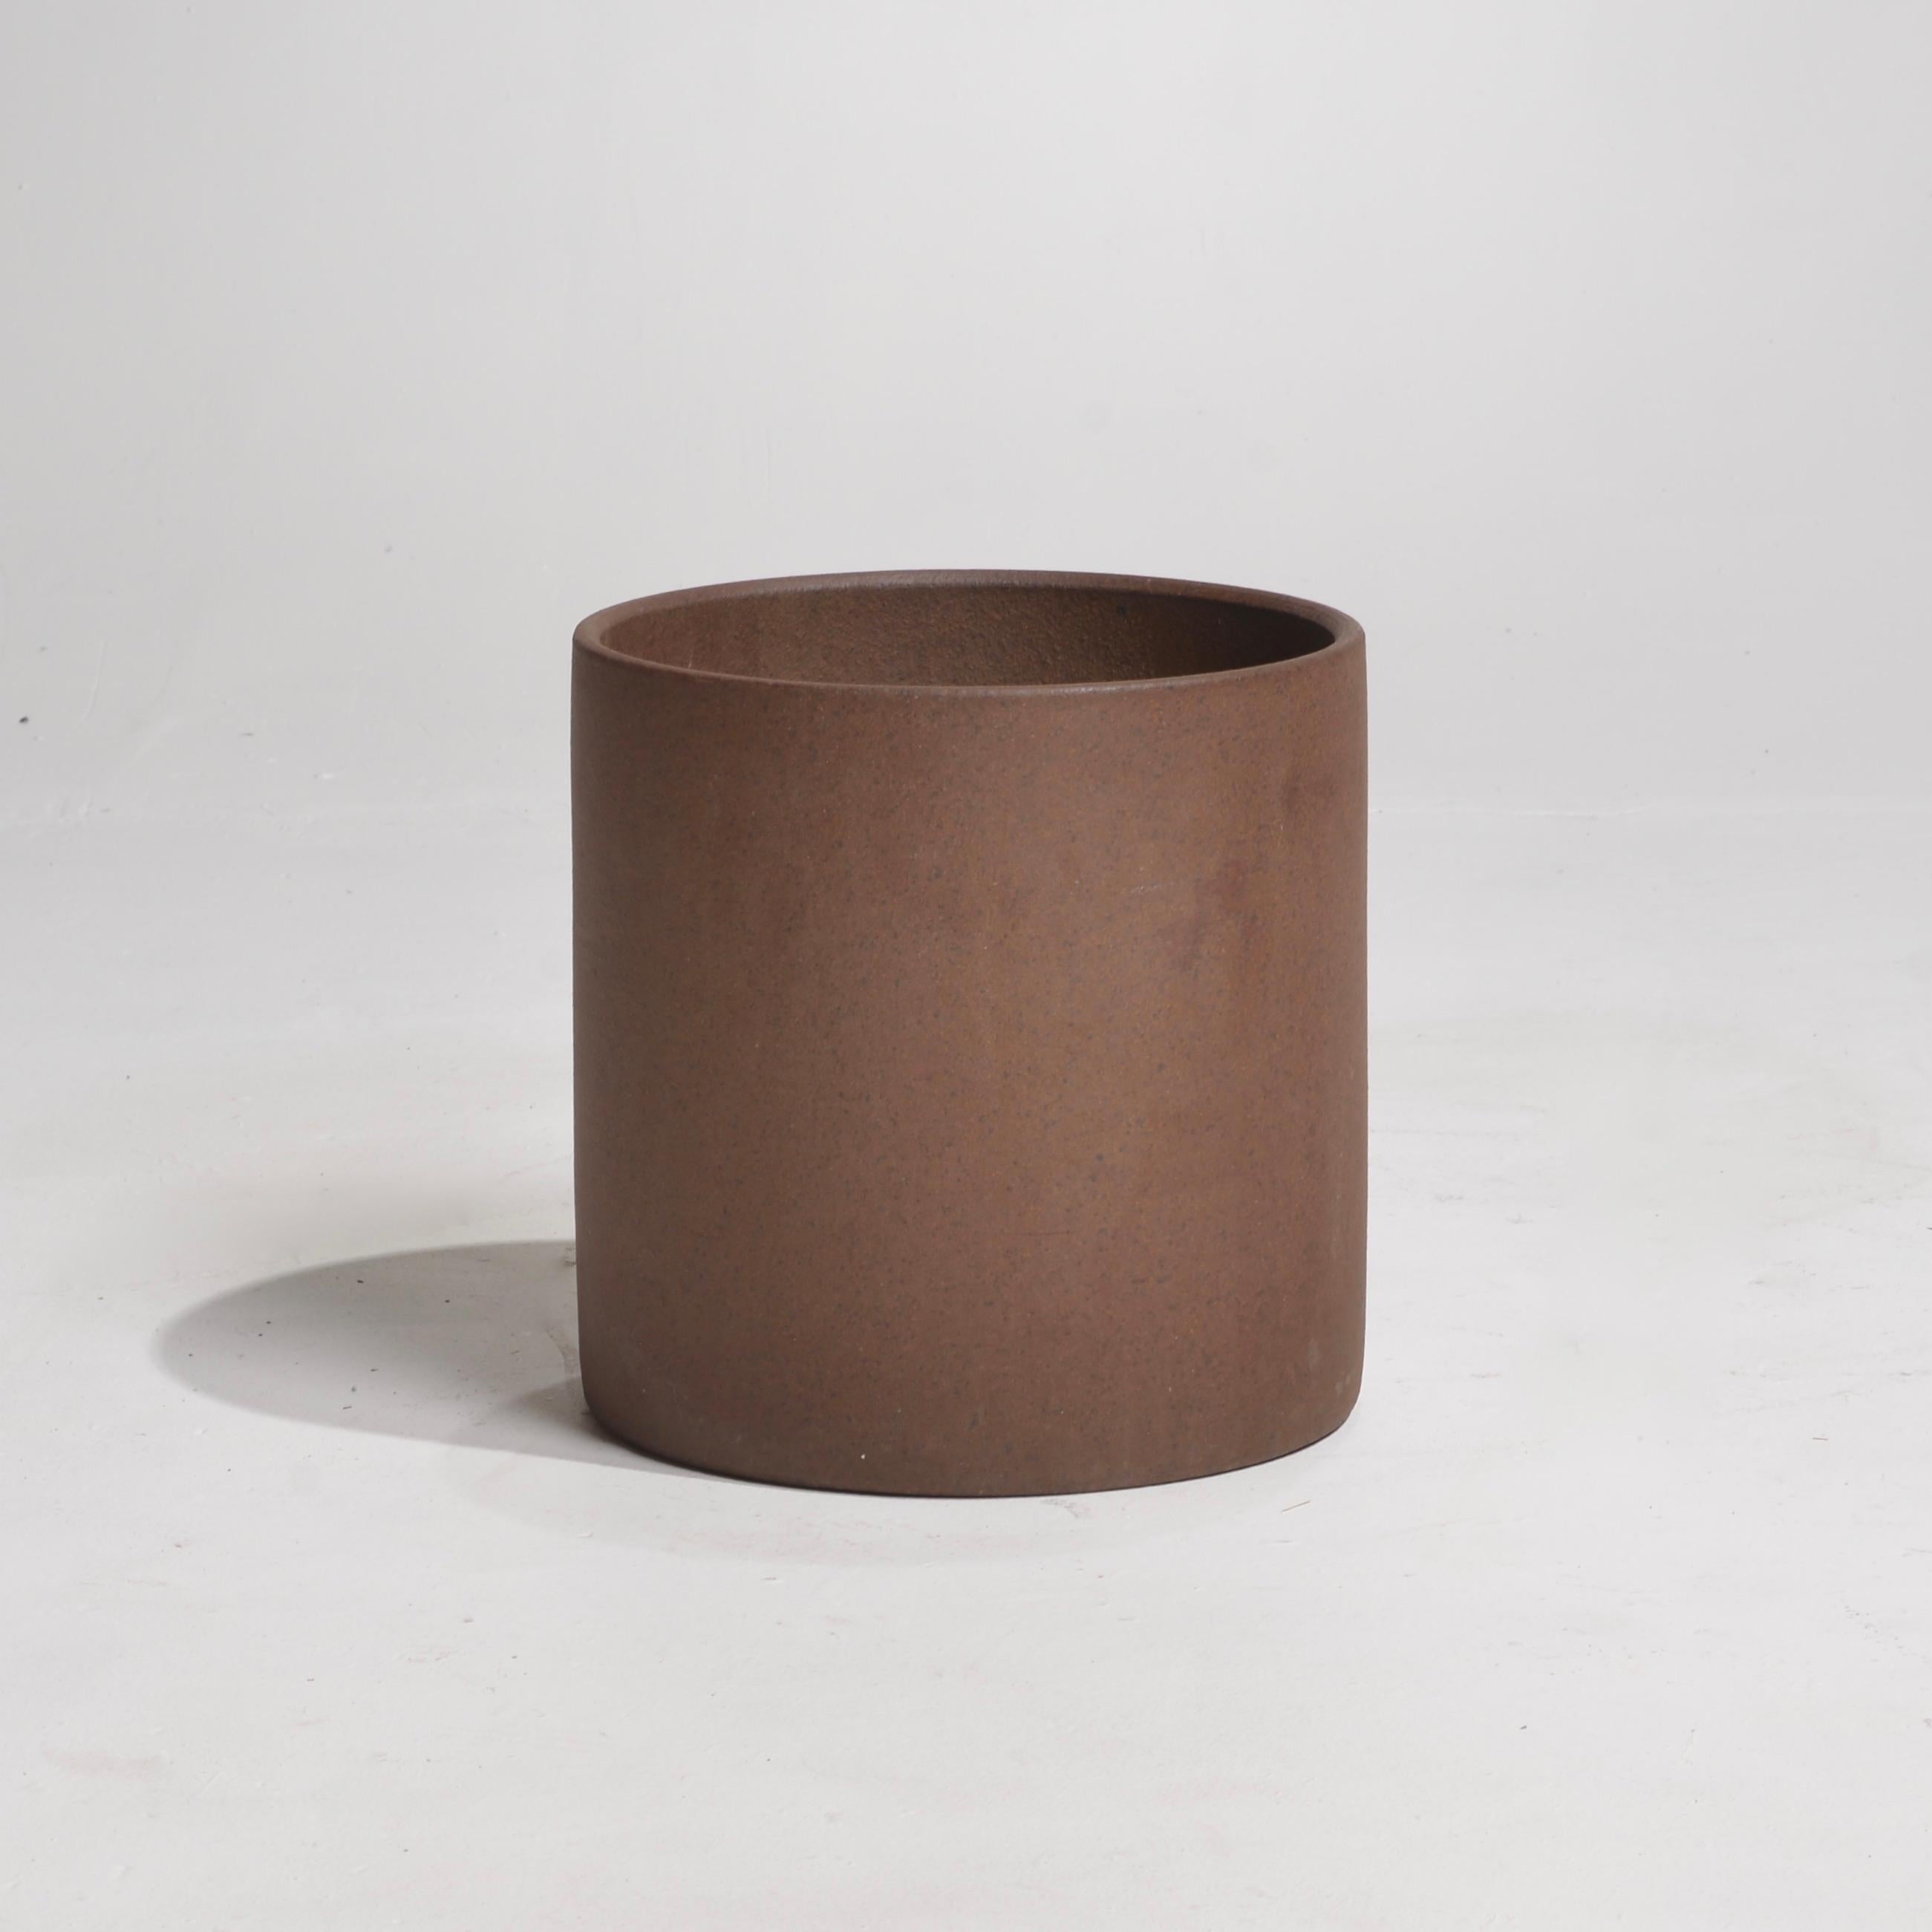 David Cressey cylindrical stoneware planter for Architectural Pottery. Architectural Pottery was a Los Angeles company founded in 1950 by Max and Rita Lawrence. Prominent architects such as Pierre Koenig and Richard Neutura favored the pottery line